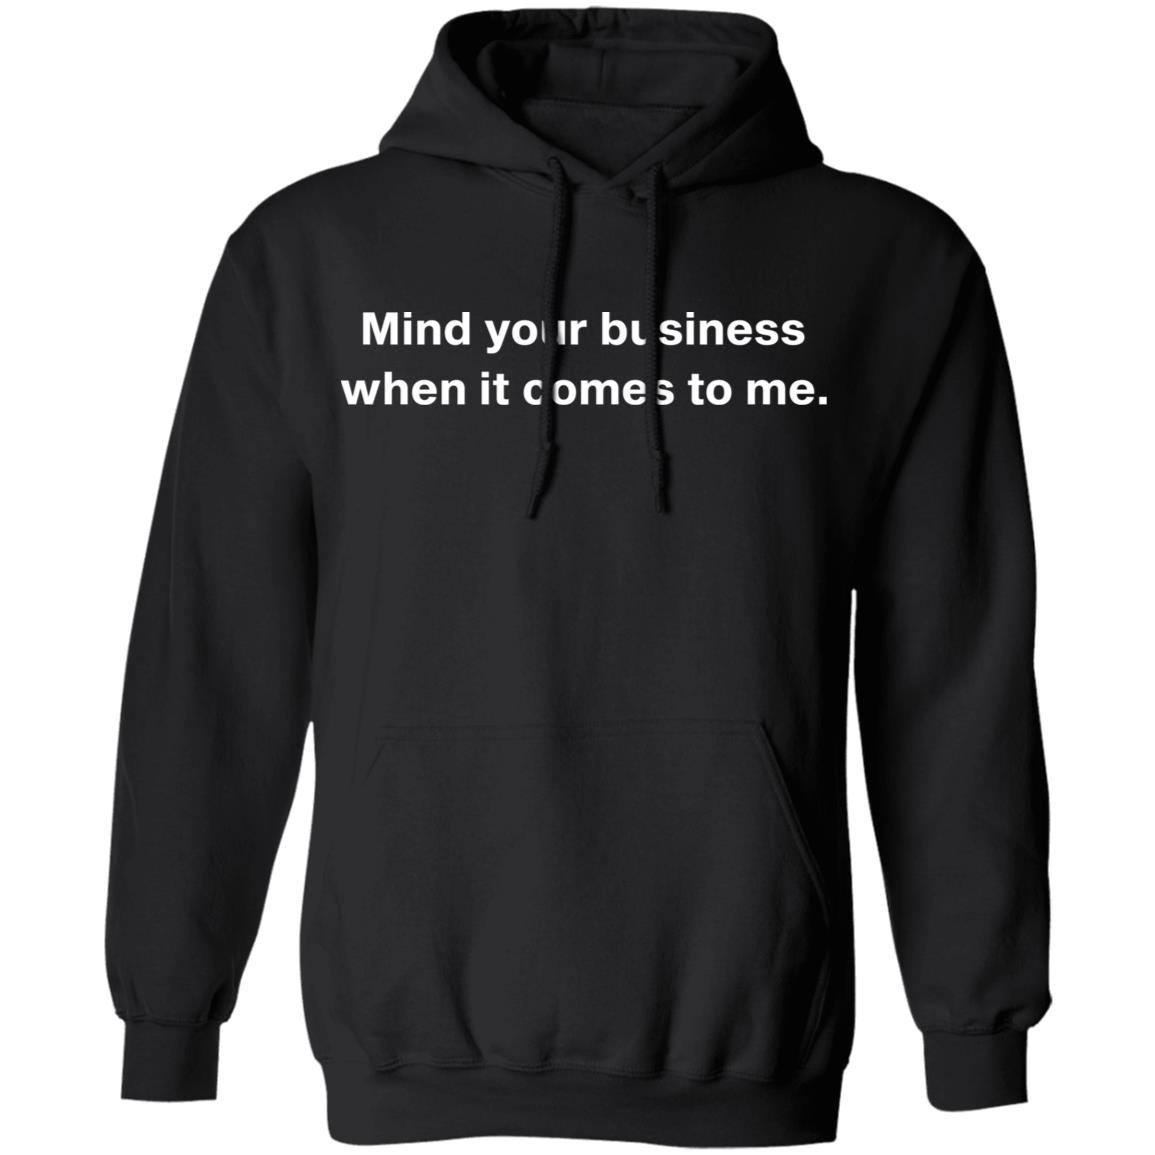 Mind your business when it comes to me shirt - Rockatee